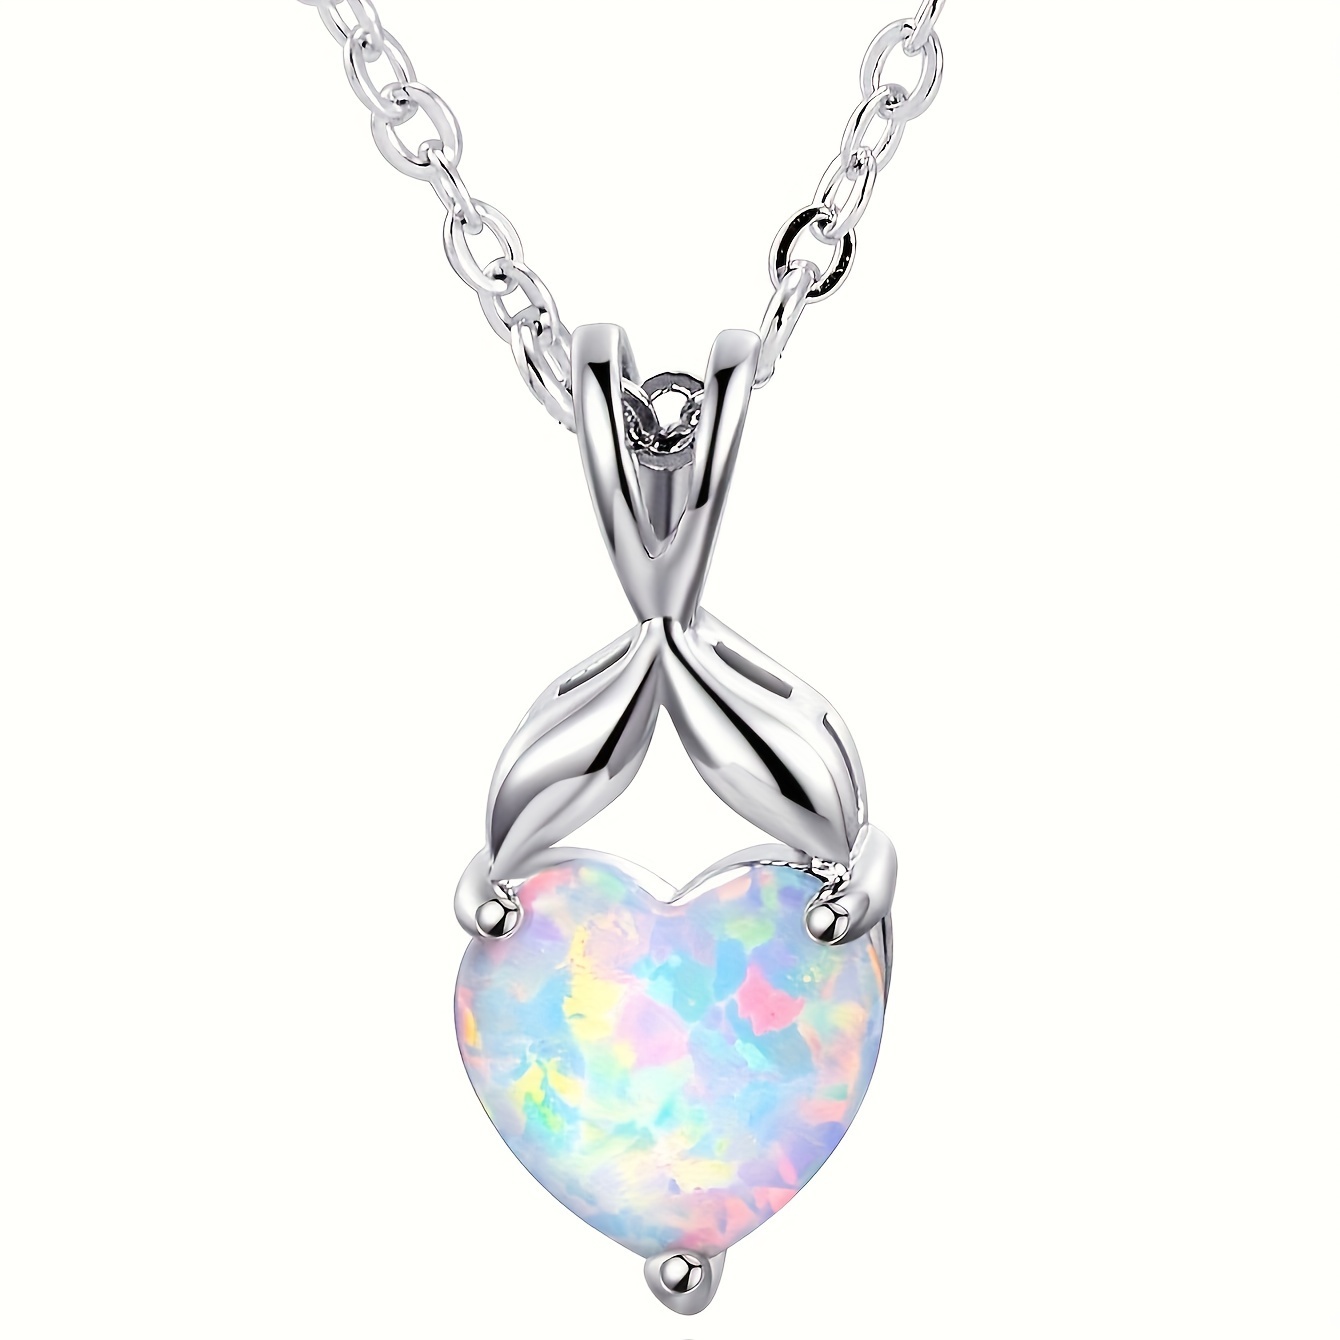 

Retro & Boho Style, Color Heart Opal Inlay Silvery Pendant Necklace, Fashion Delicate Accessory For Daily Wear, Idea Gift For Ladies